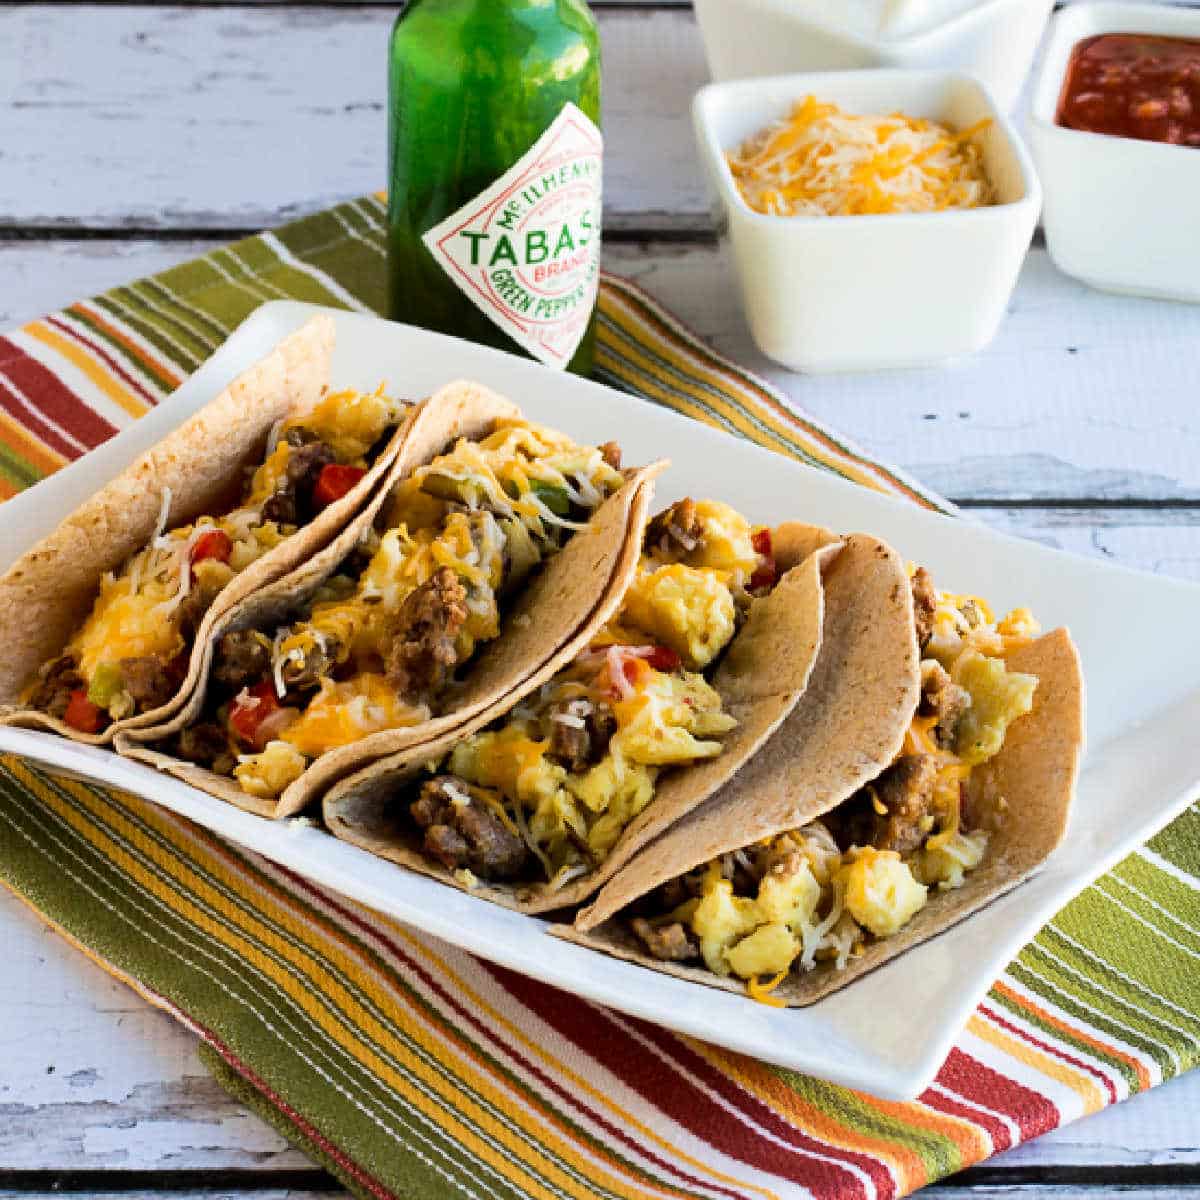 Breakfast Tacos with eggs, sausage, peppers, and cheese shown on serving platter.